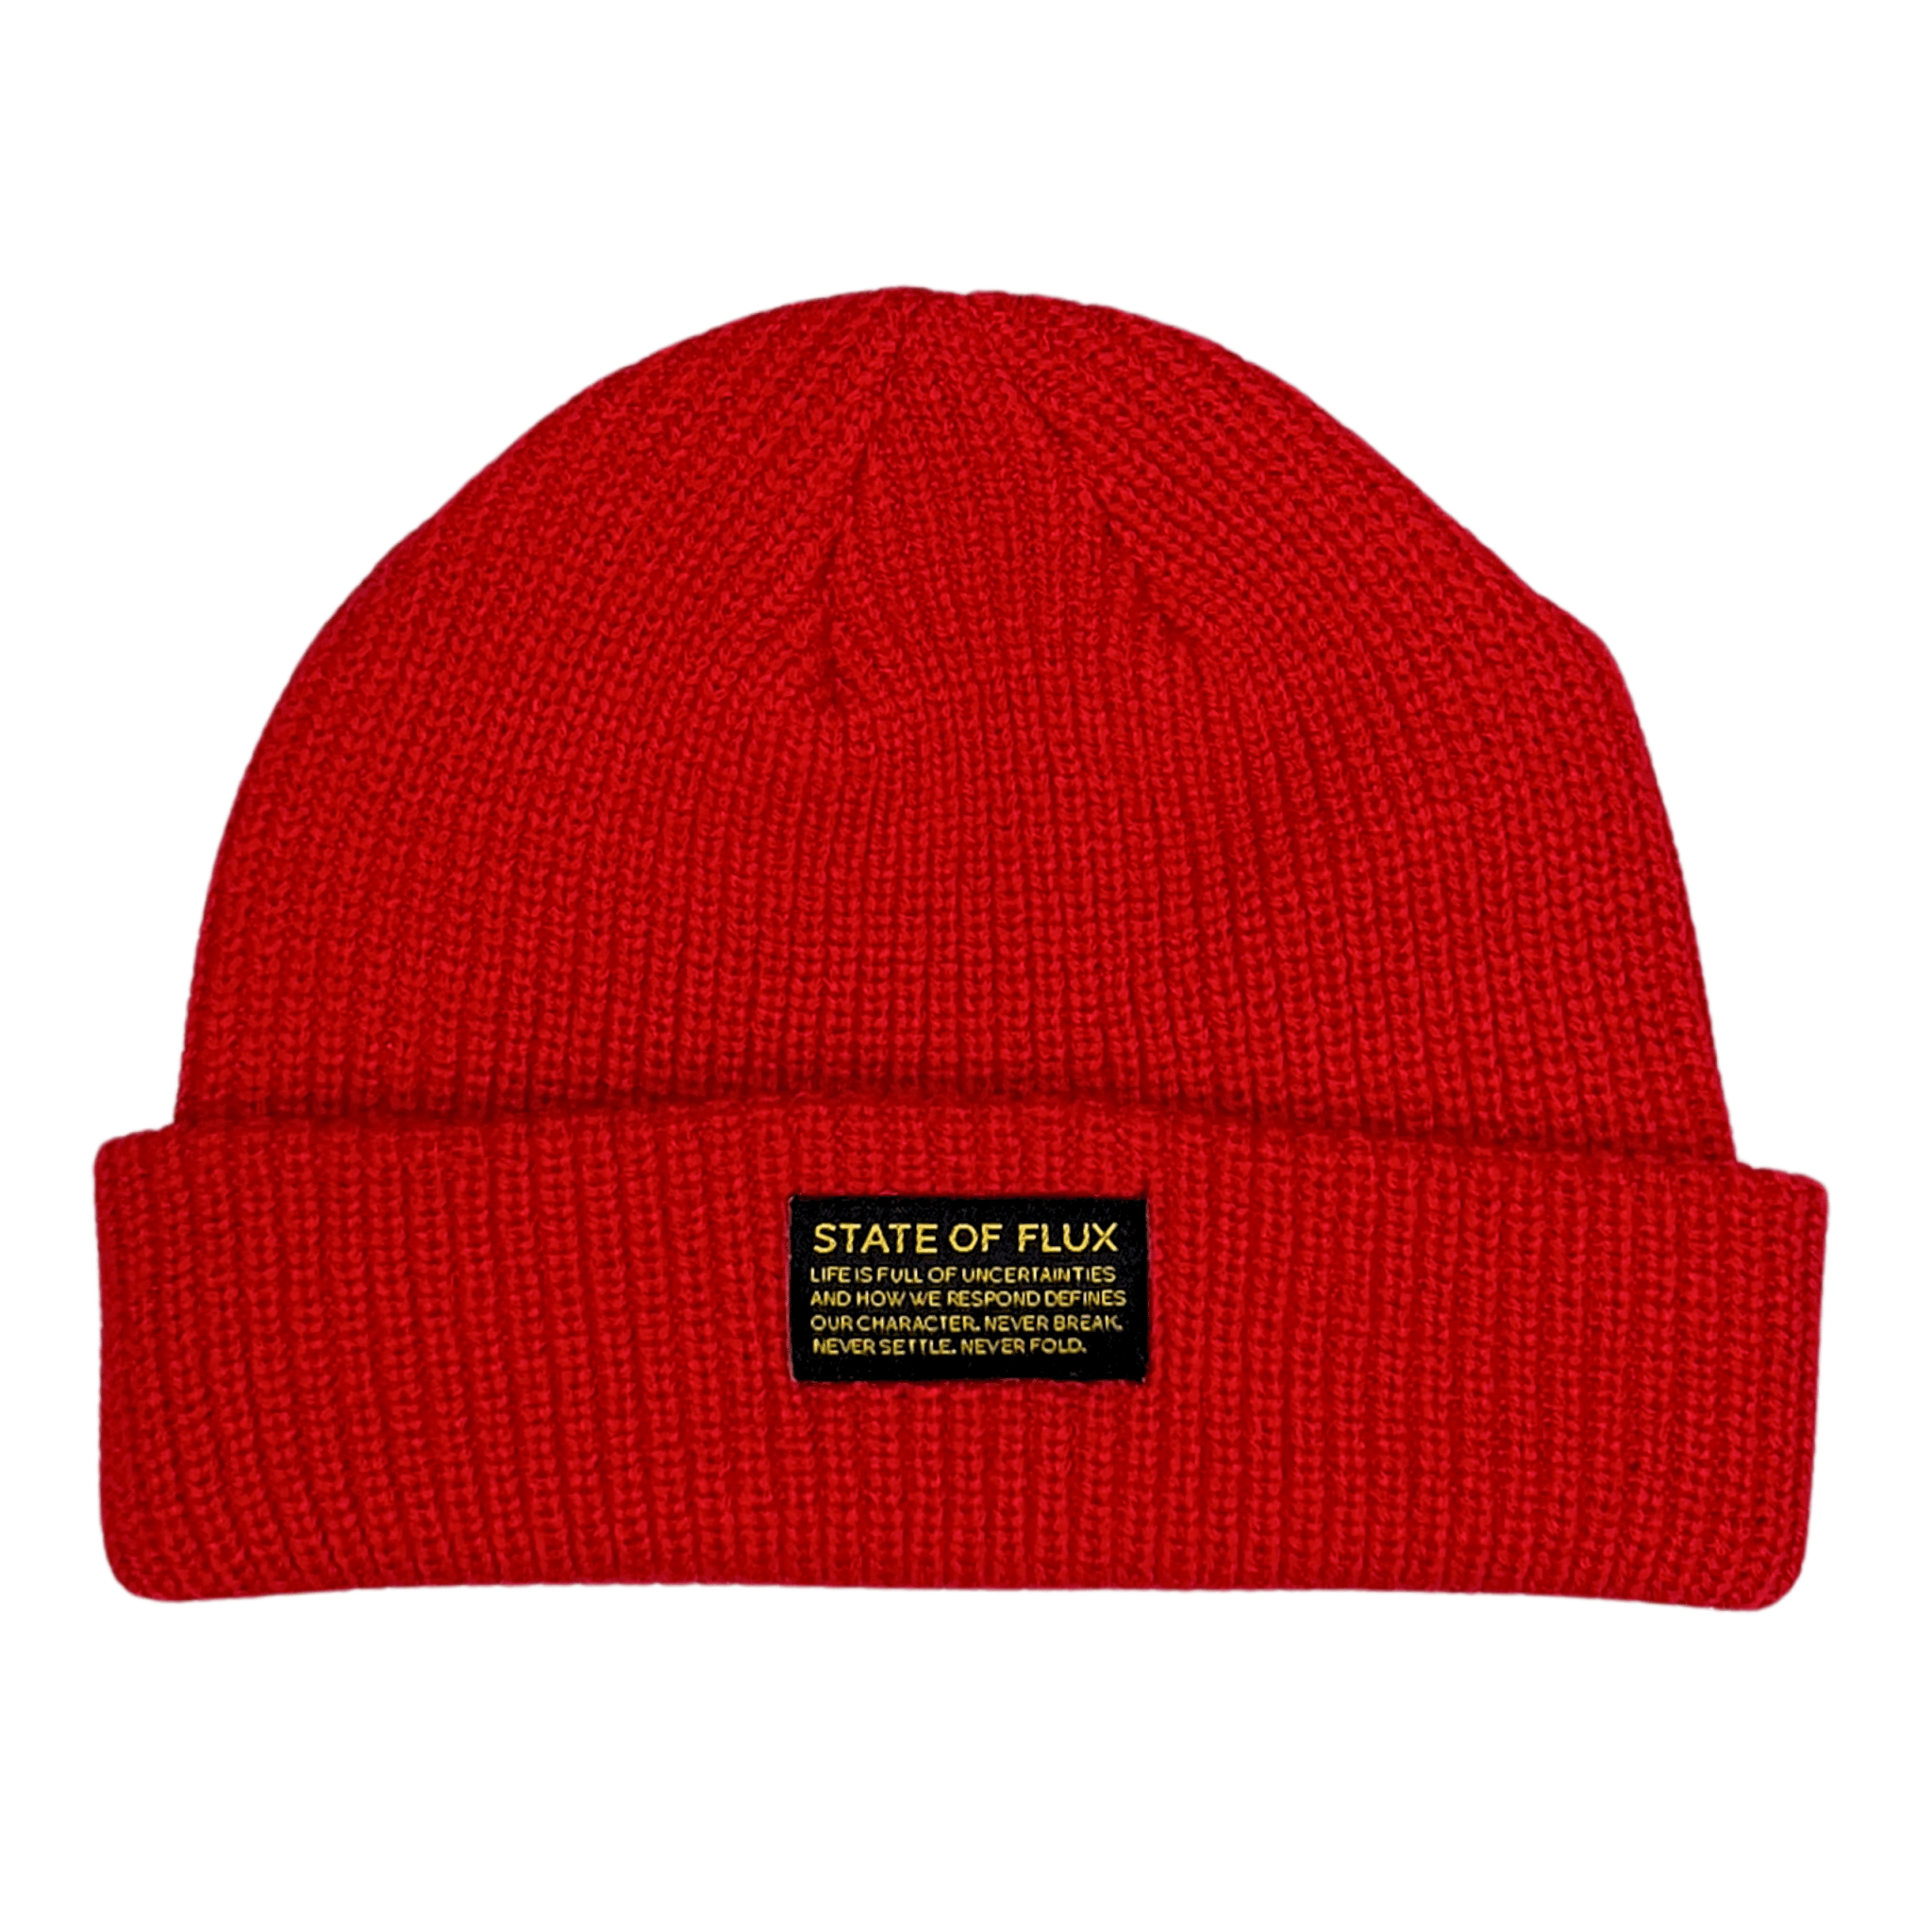 Short Knitted Mantra Beanie in red